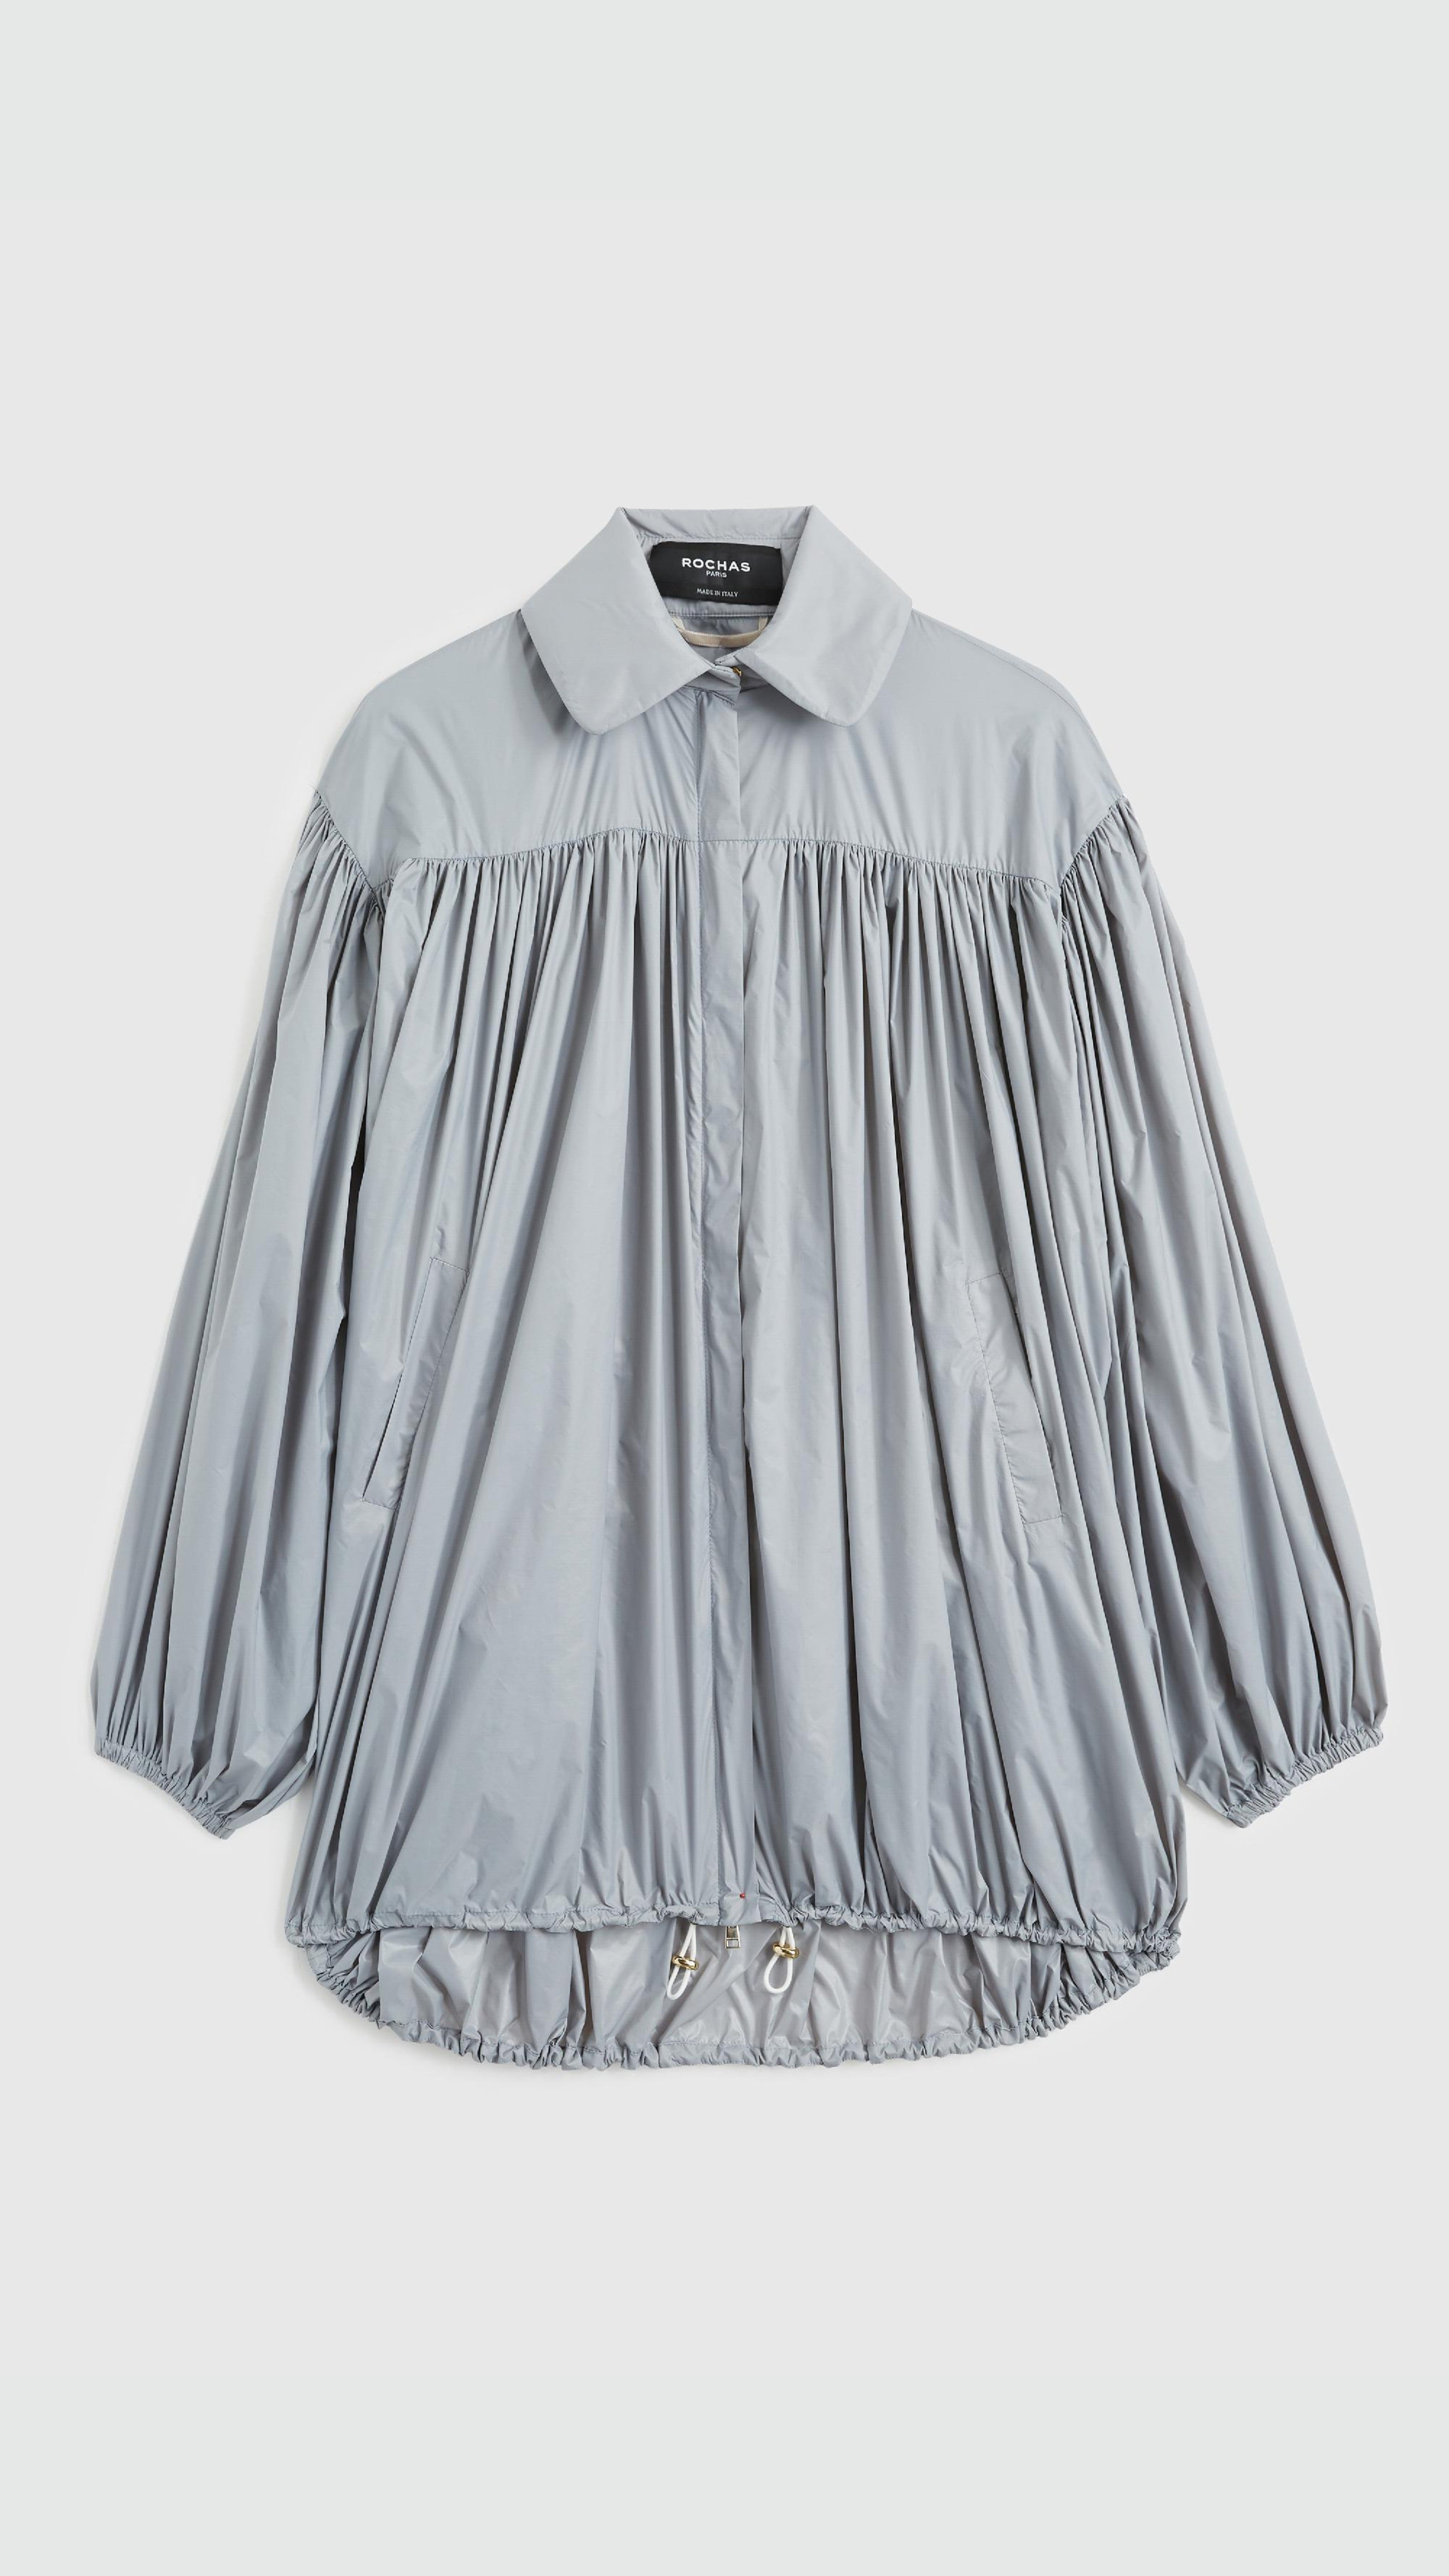 Rochas Paris Fashion Oversized Wind Jacket in a sky silver blue. Pleated draping across the front makes this elegant and luxurious outerwear jacket. Product photo shown from the front. 